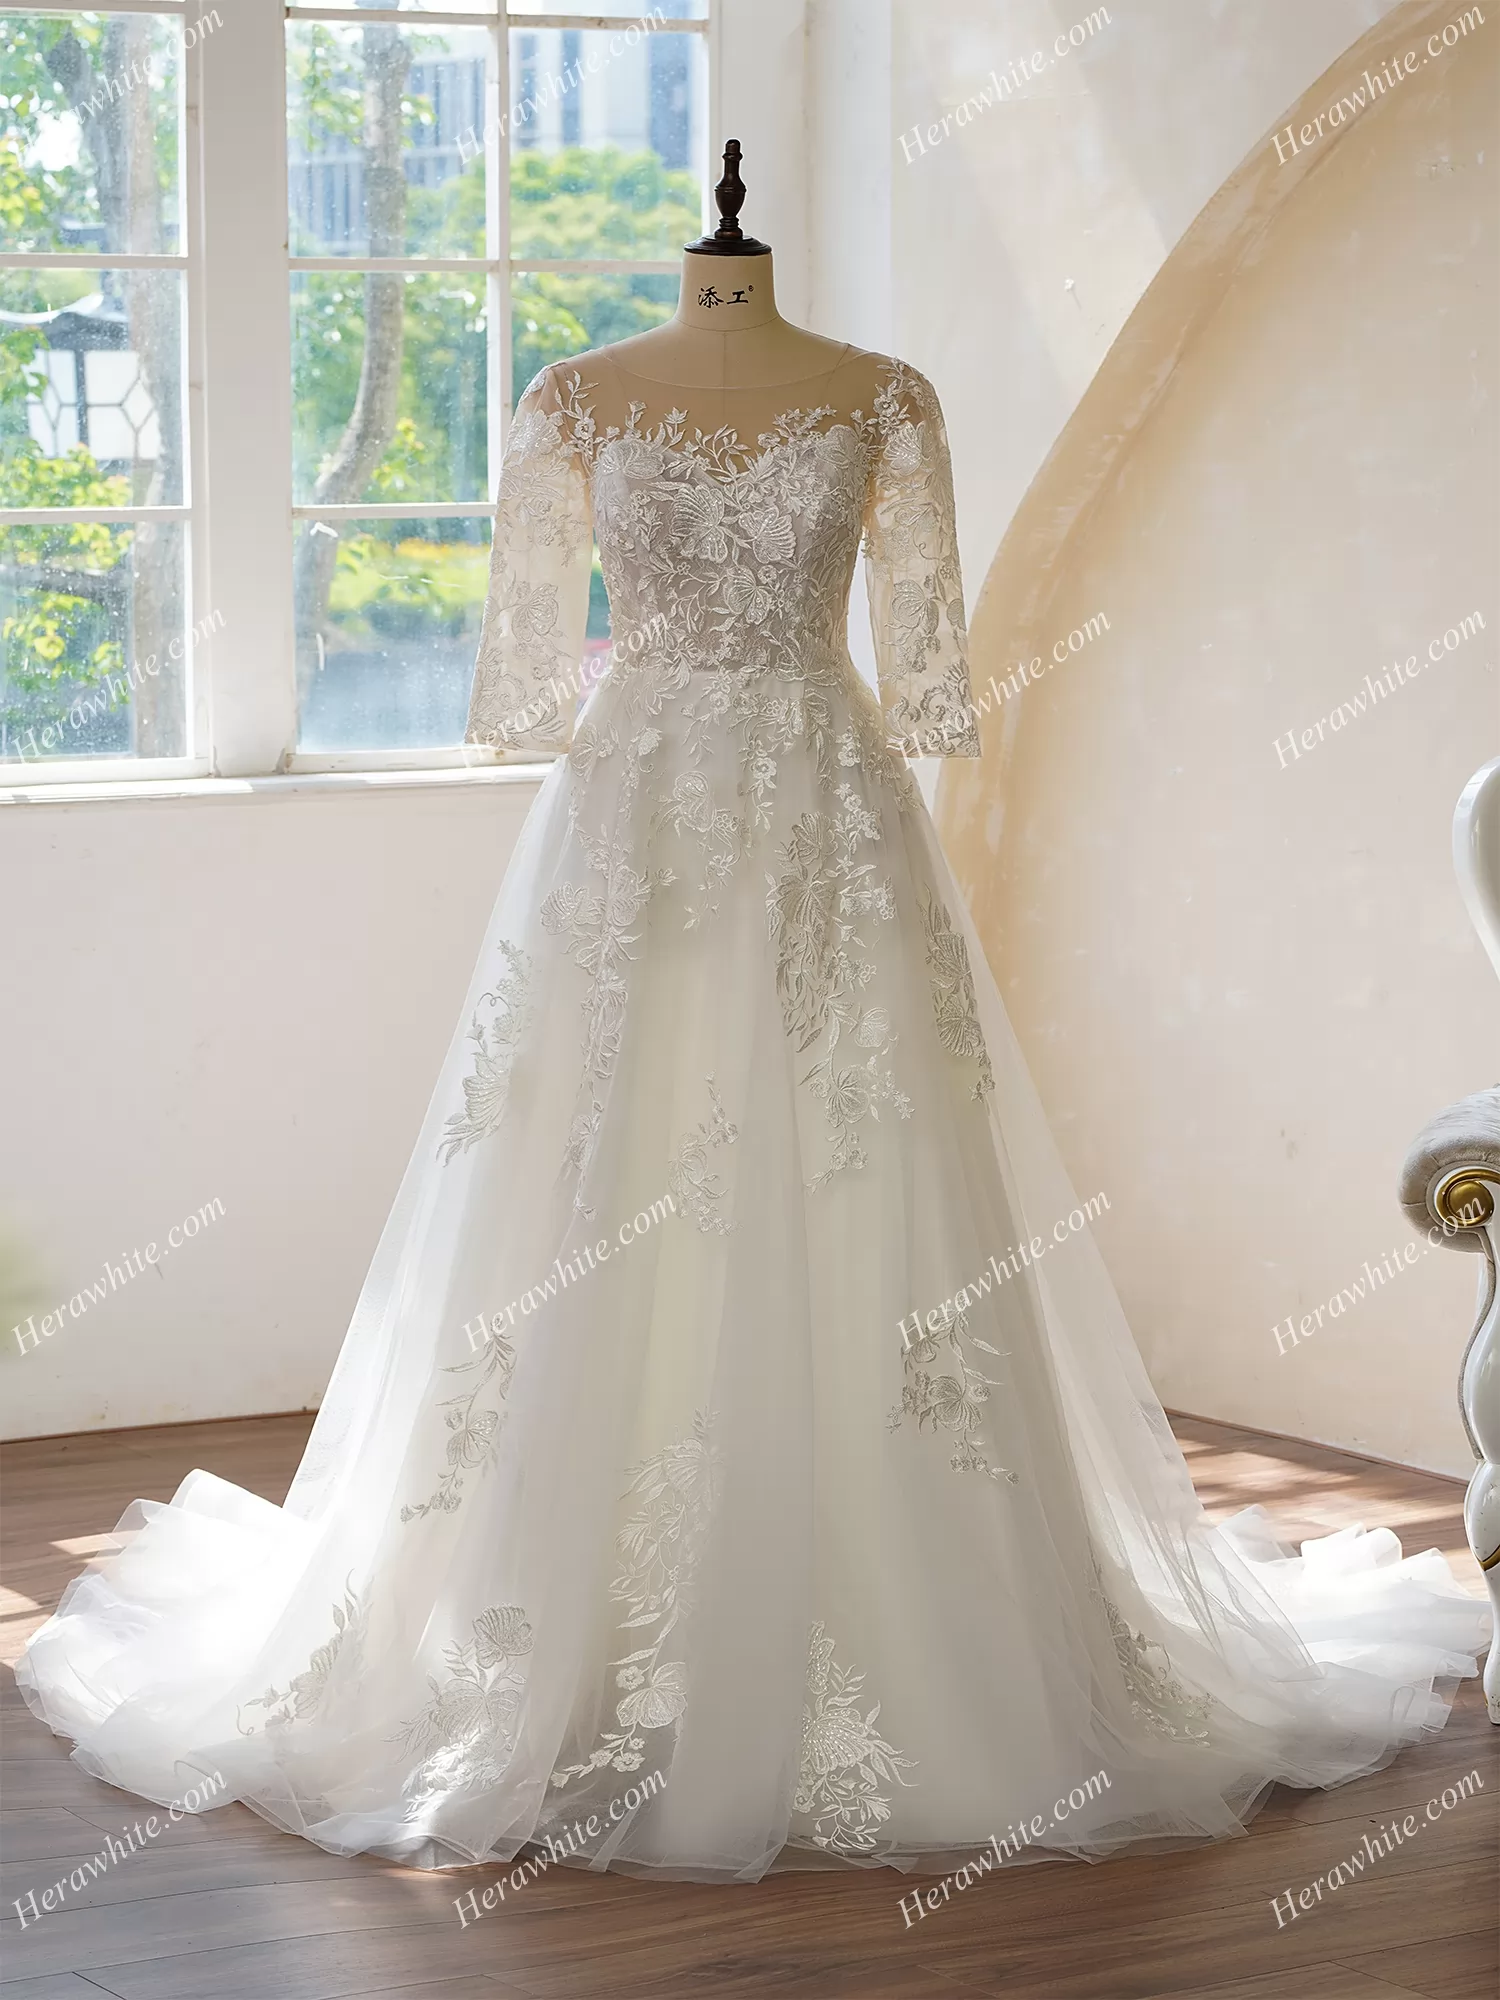 Illusion Neckline and Illusion Back With Buttons Bridal Dress